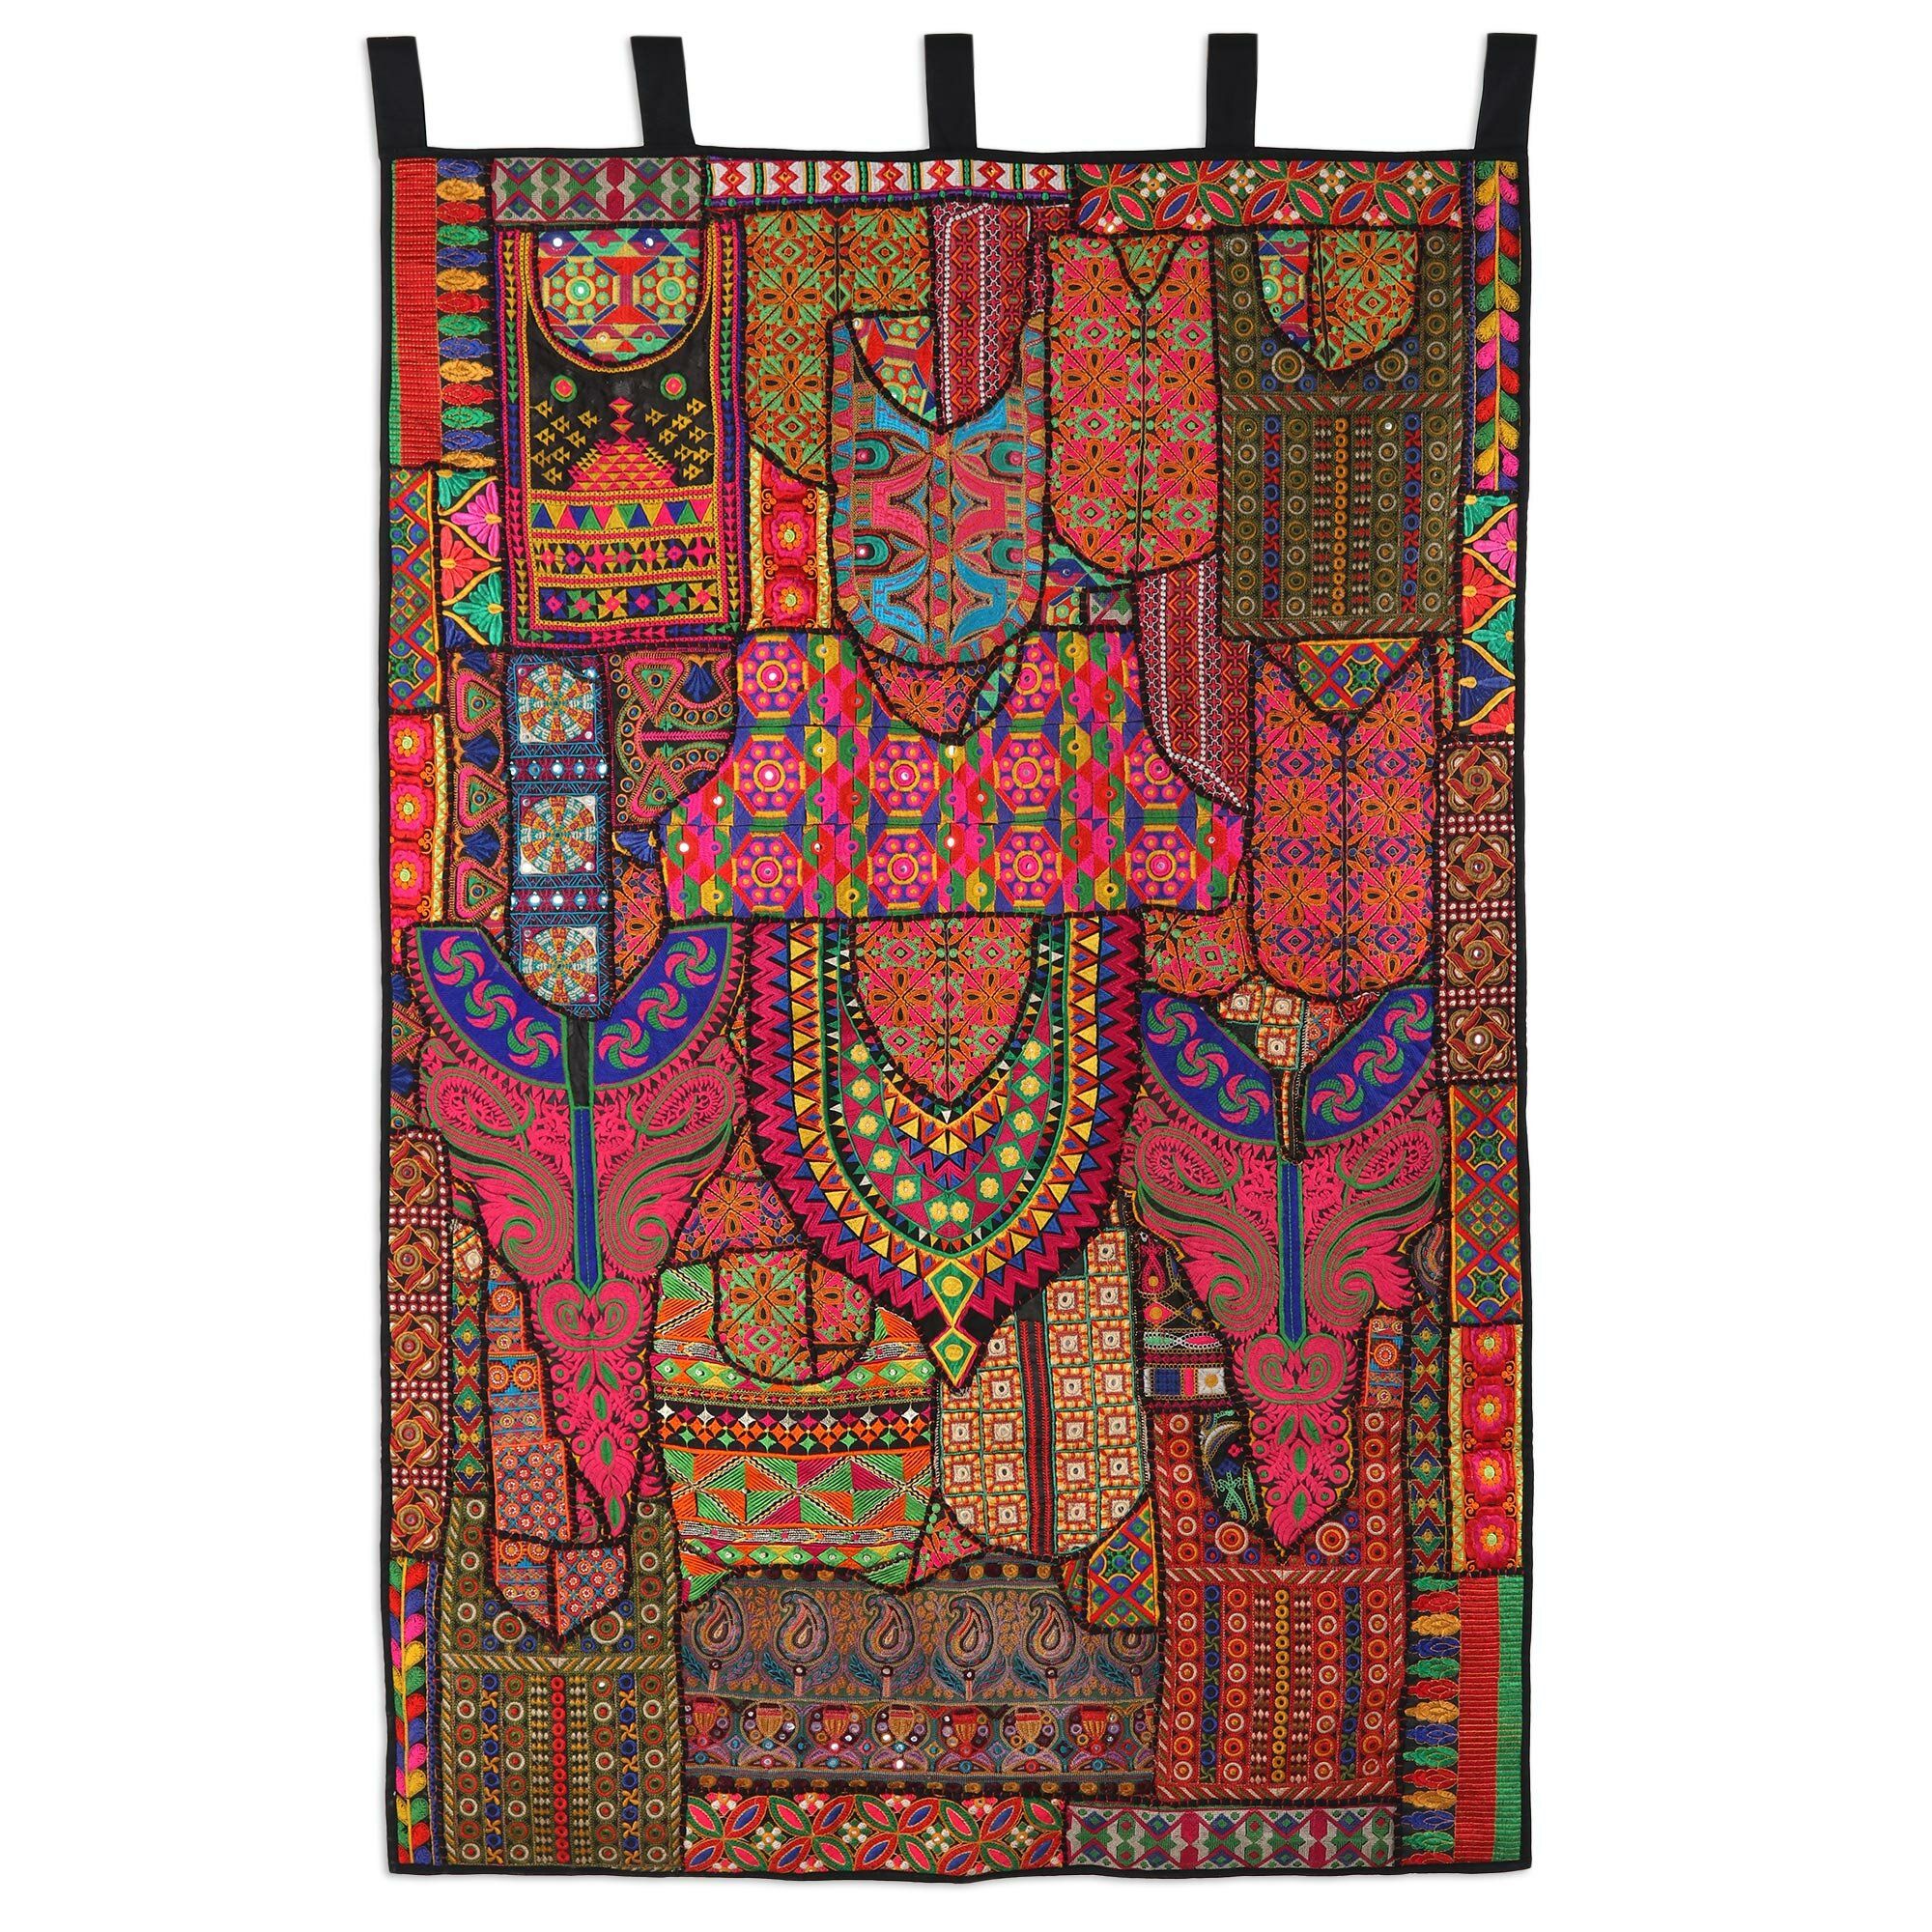 Handmade Indian Flavor Recycled Cotton Blend Patchwork Wall Hanging In Latest Blended Fabric Ranier Wall Hangings With Hanging Accessories Included (View 9 of 20)